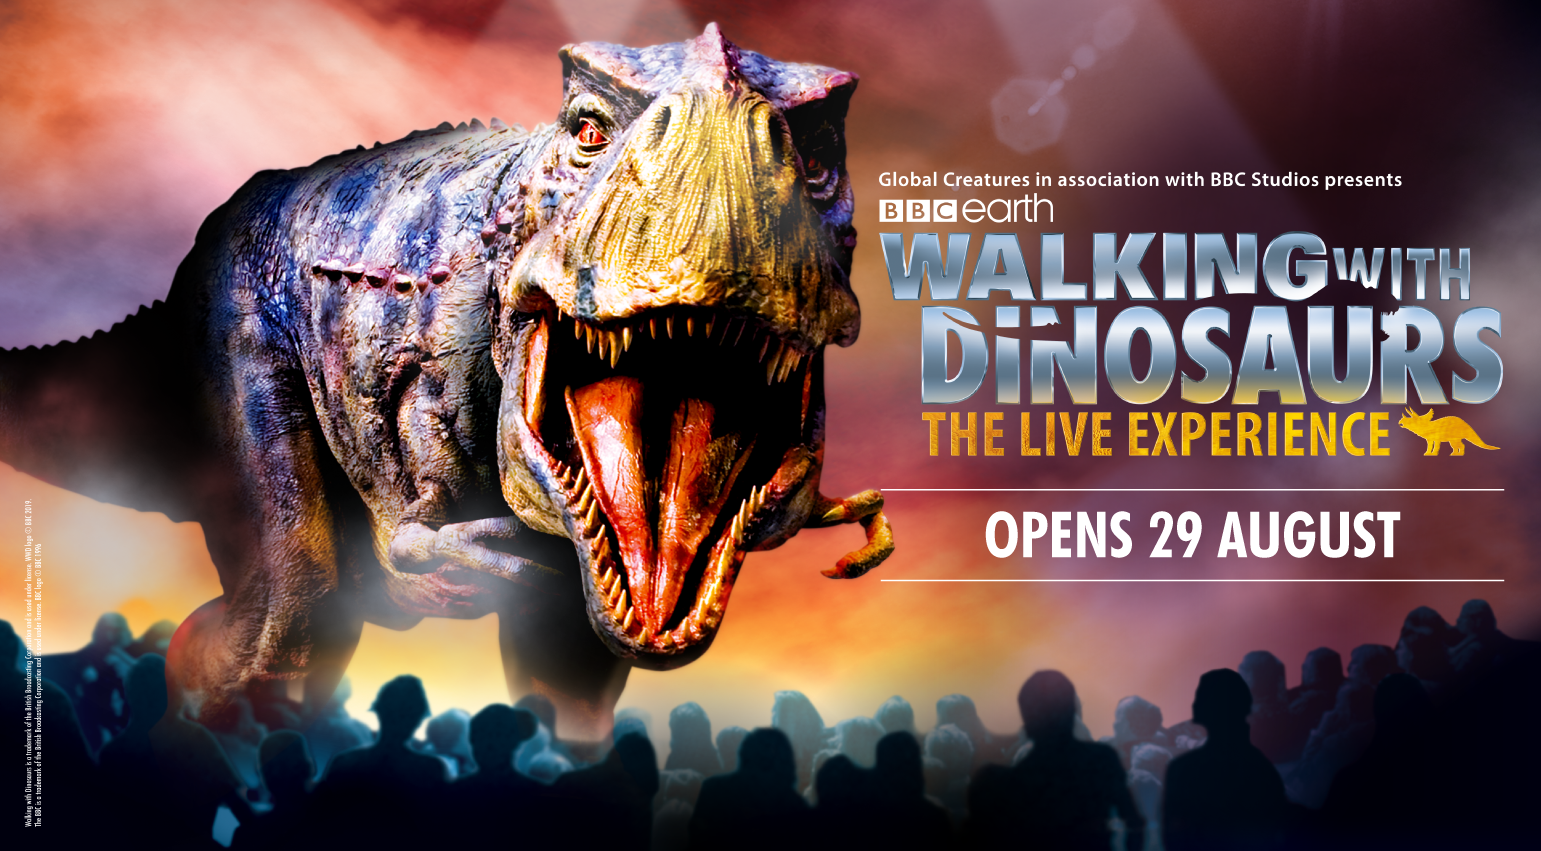 UnUsUaL brings Walking with Dinosaurs to Singapore!